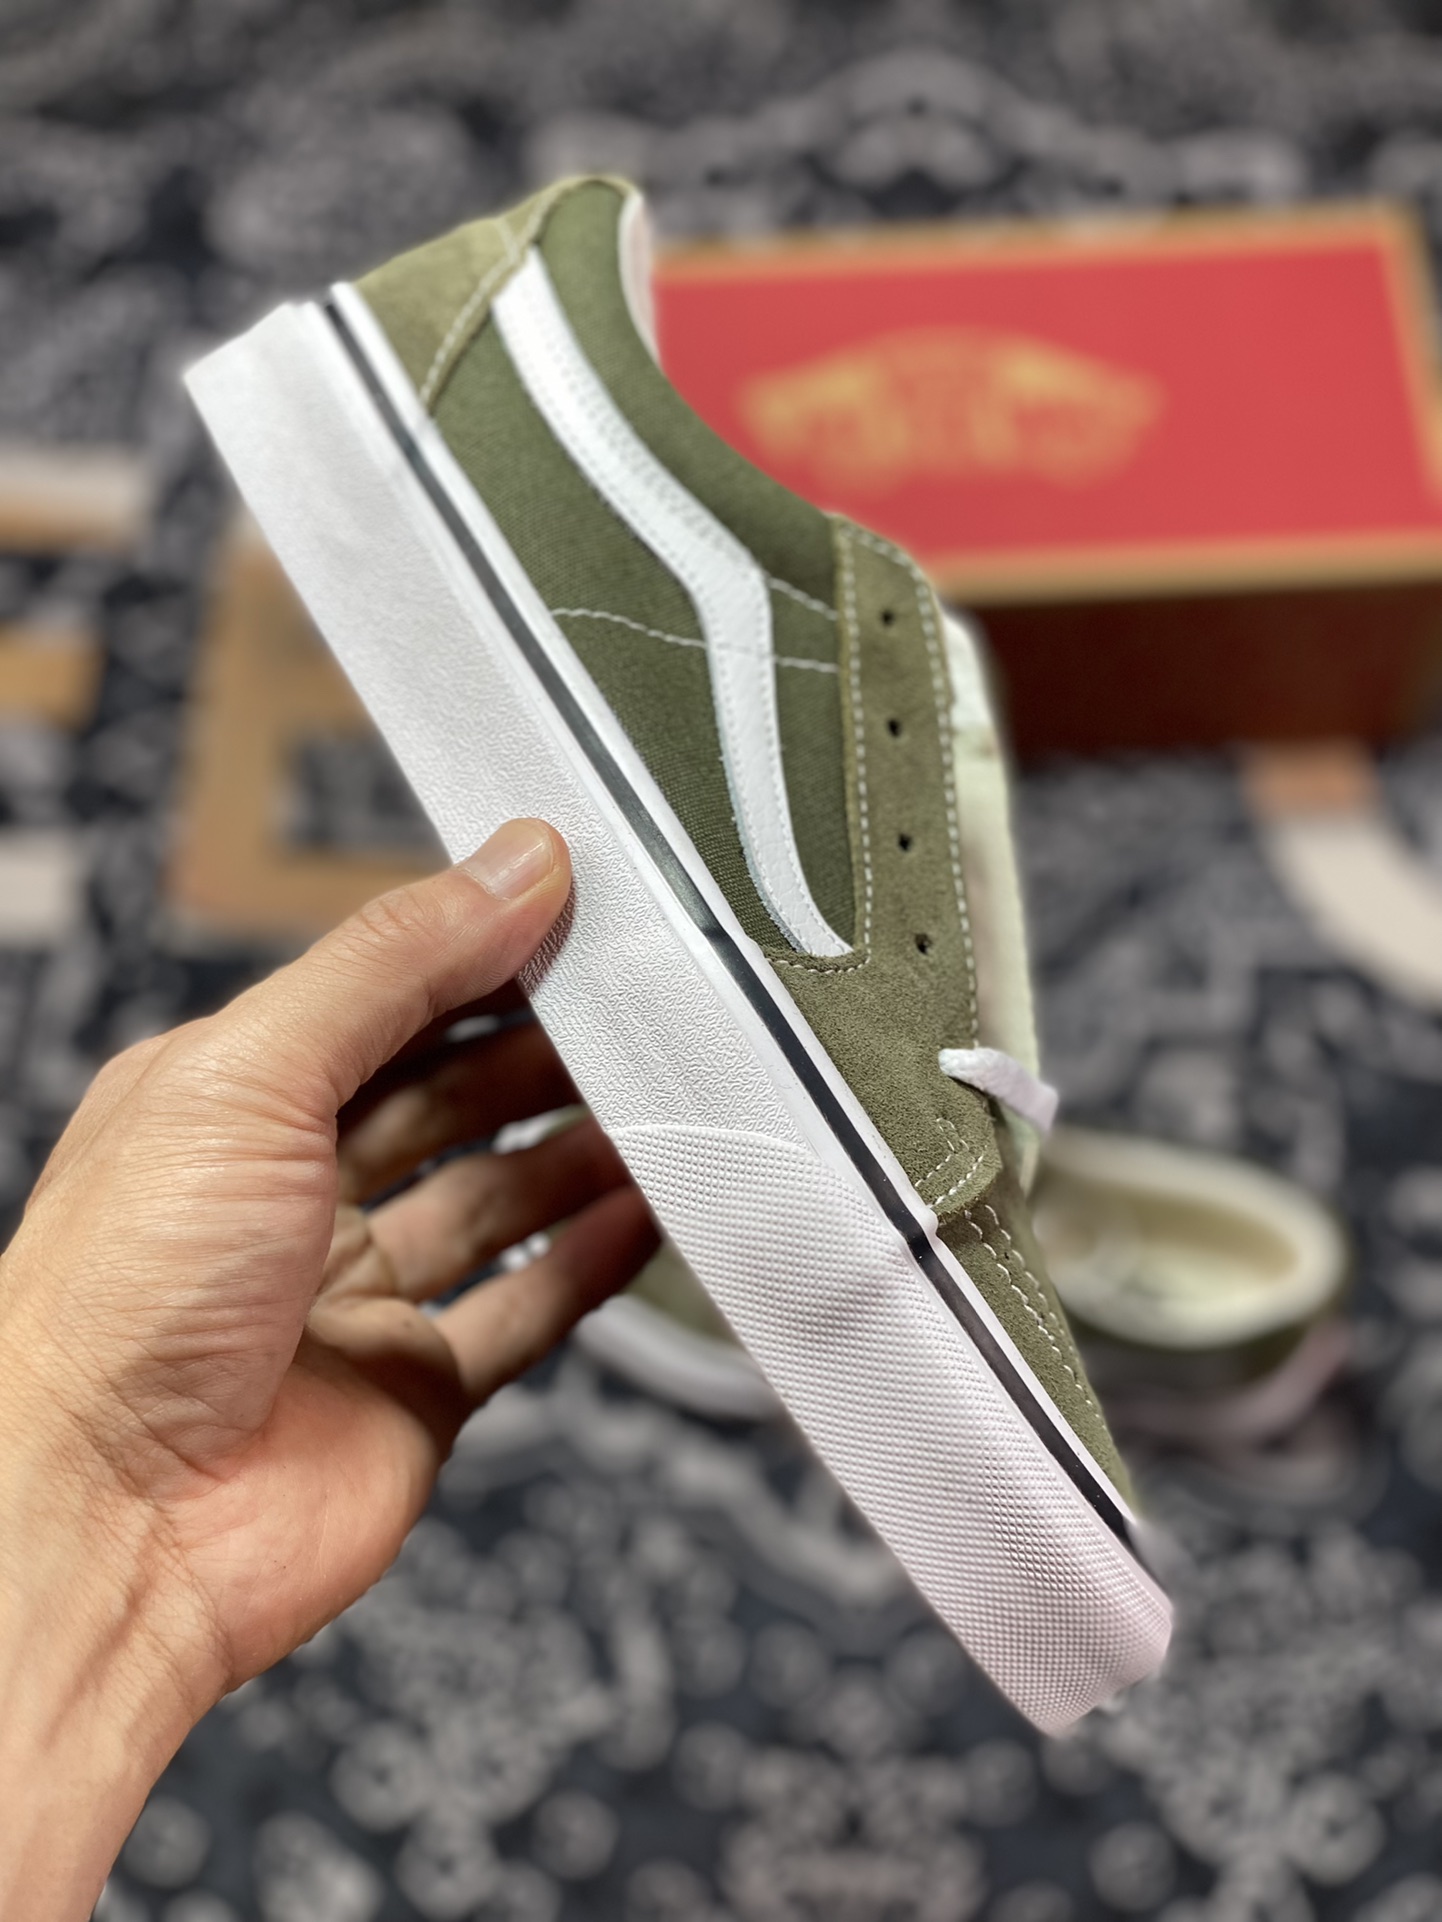 Defining simplicity and versatile style, I highly recommend Vans SK8-Low grass green